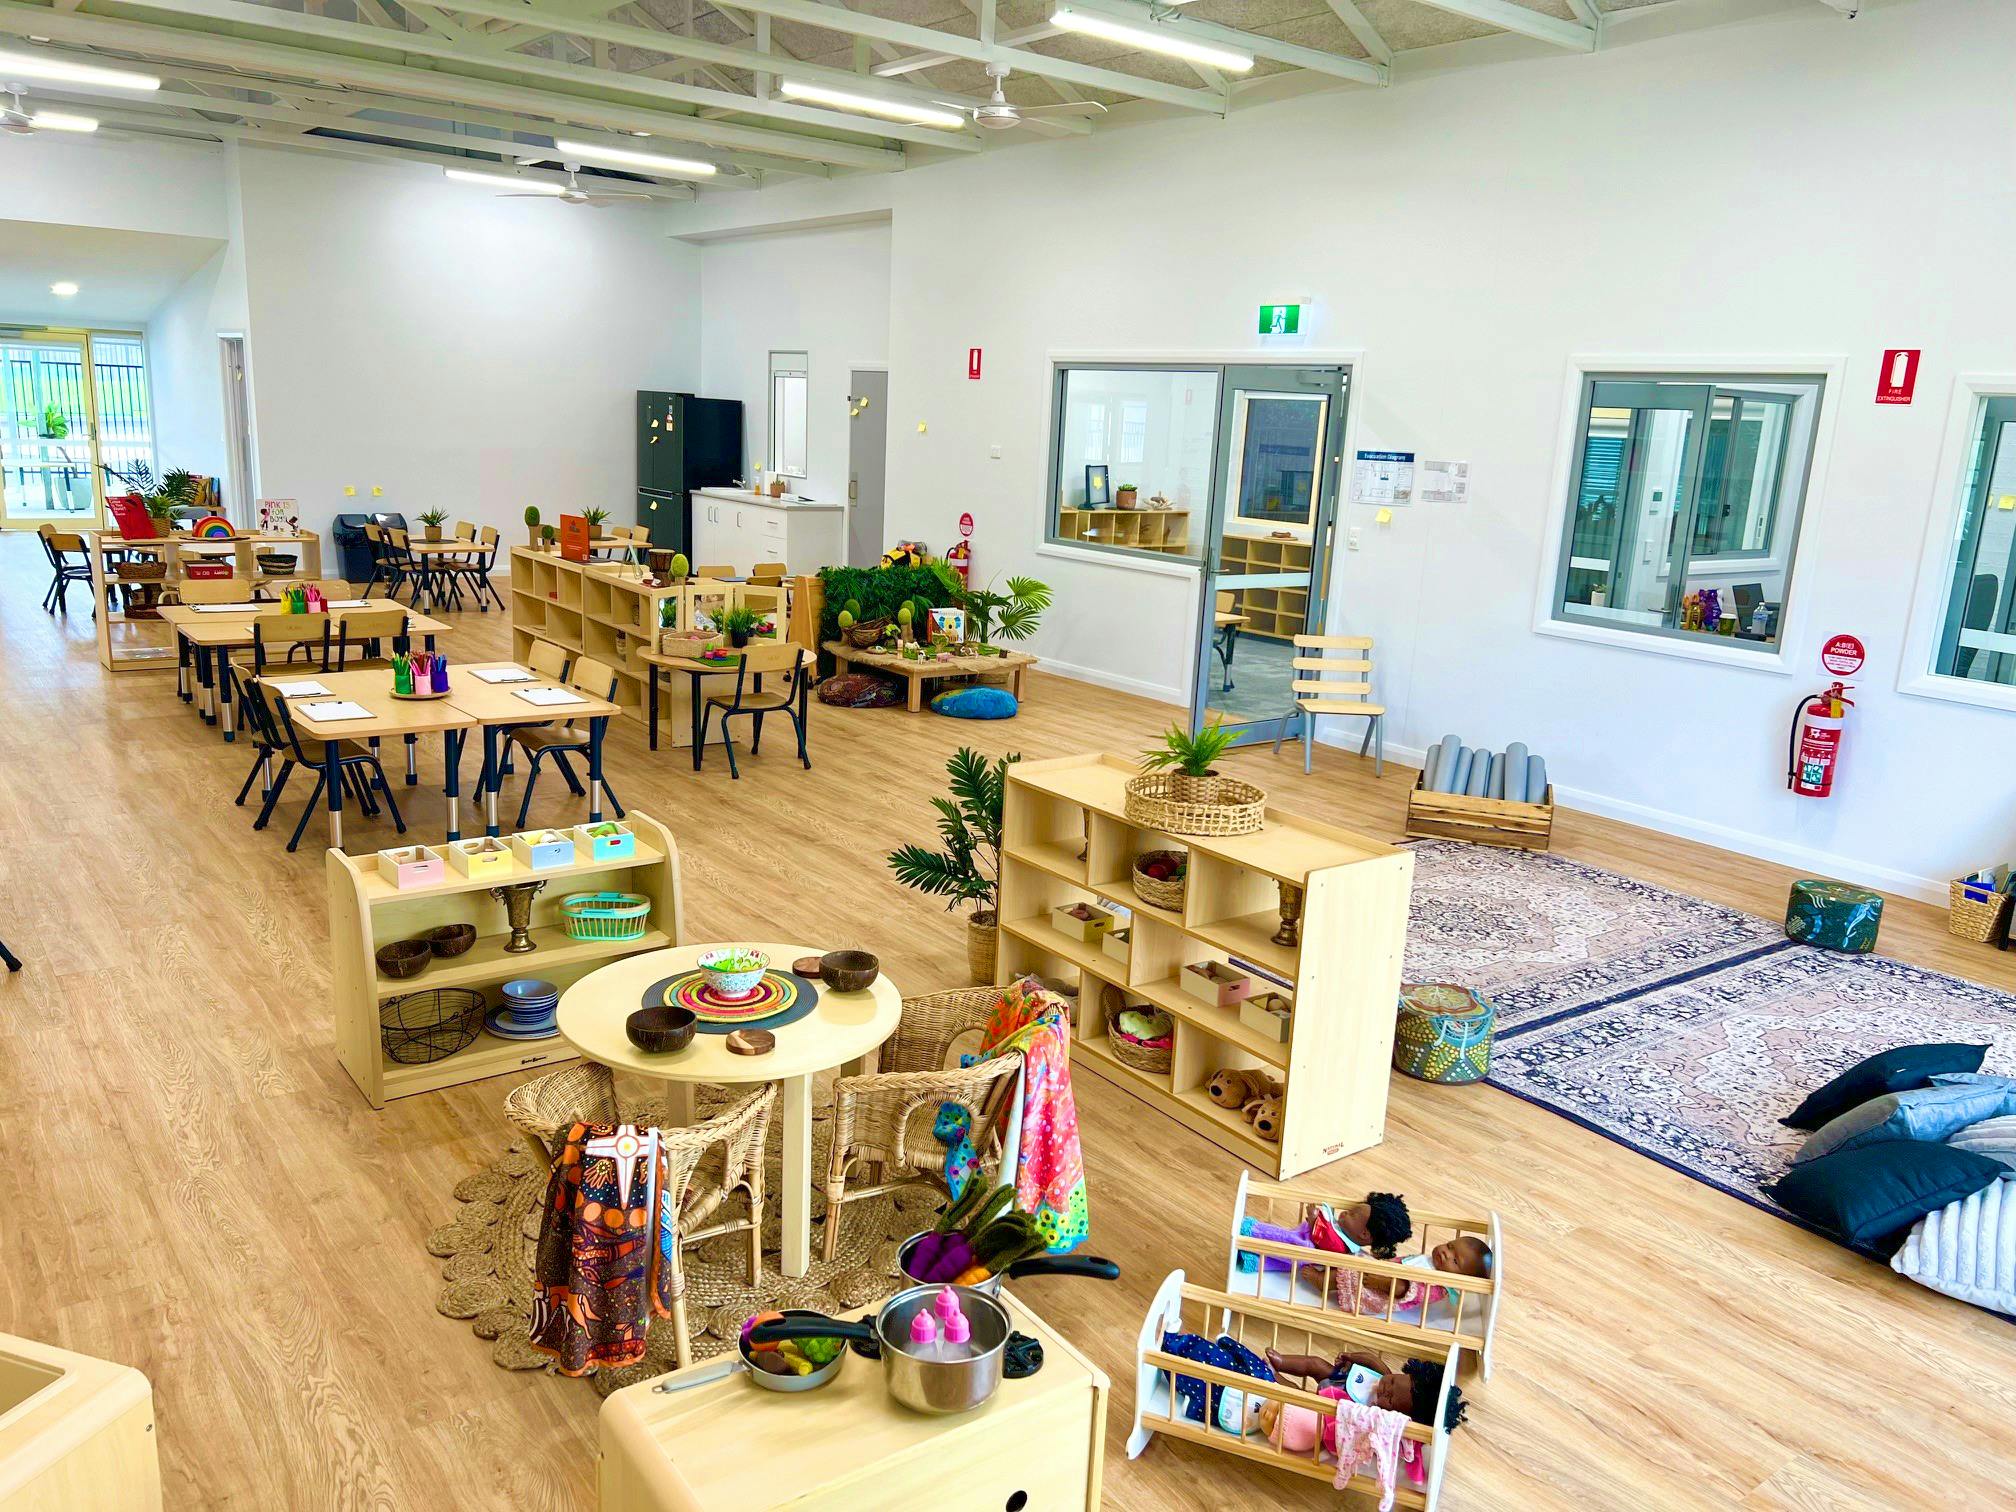 Image of a large room filled with children's tables and shelving, with play equipment throughout.